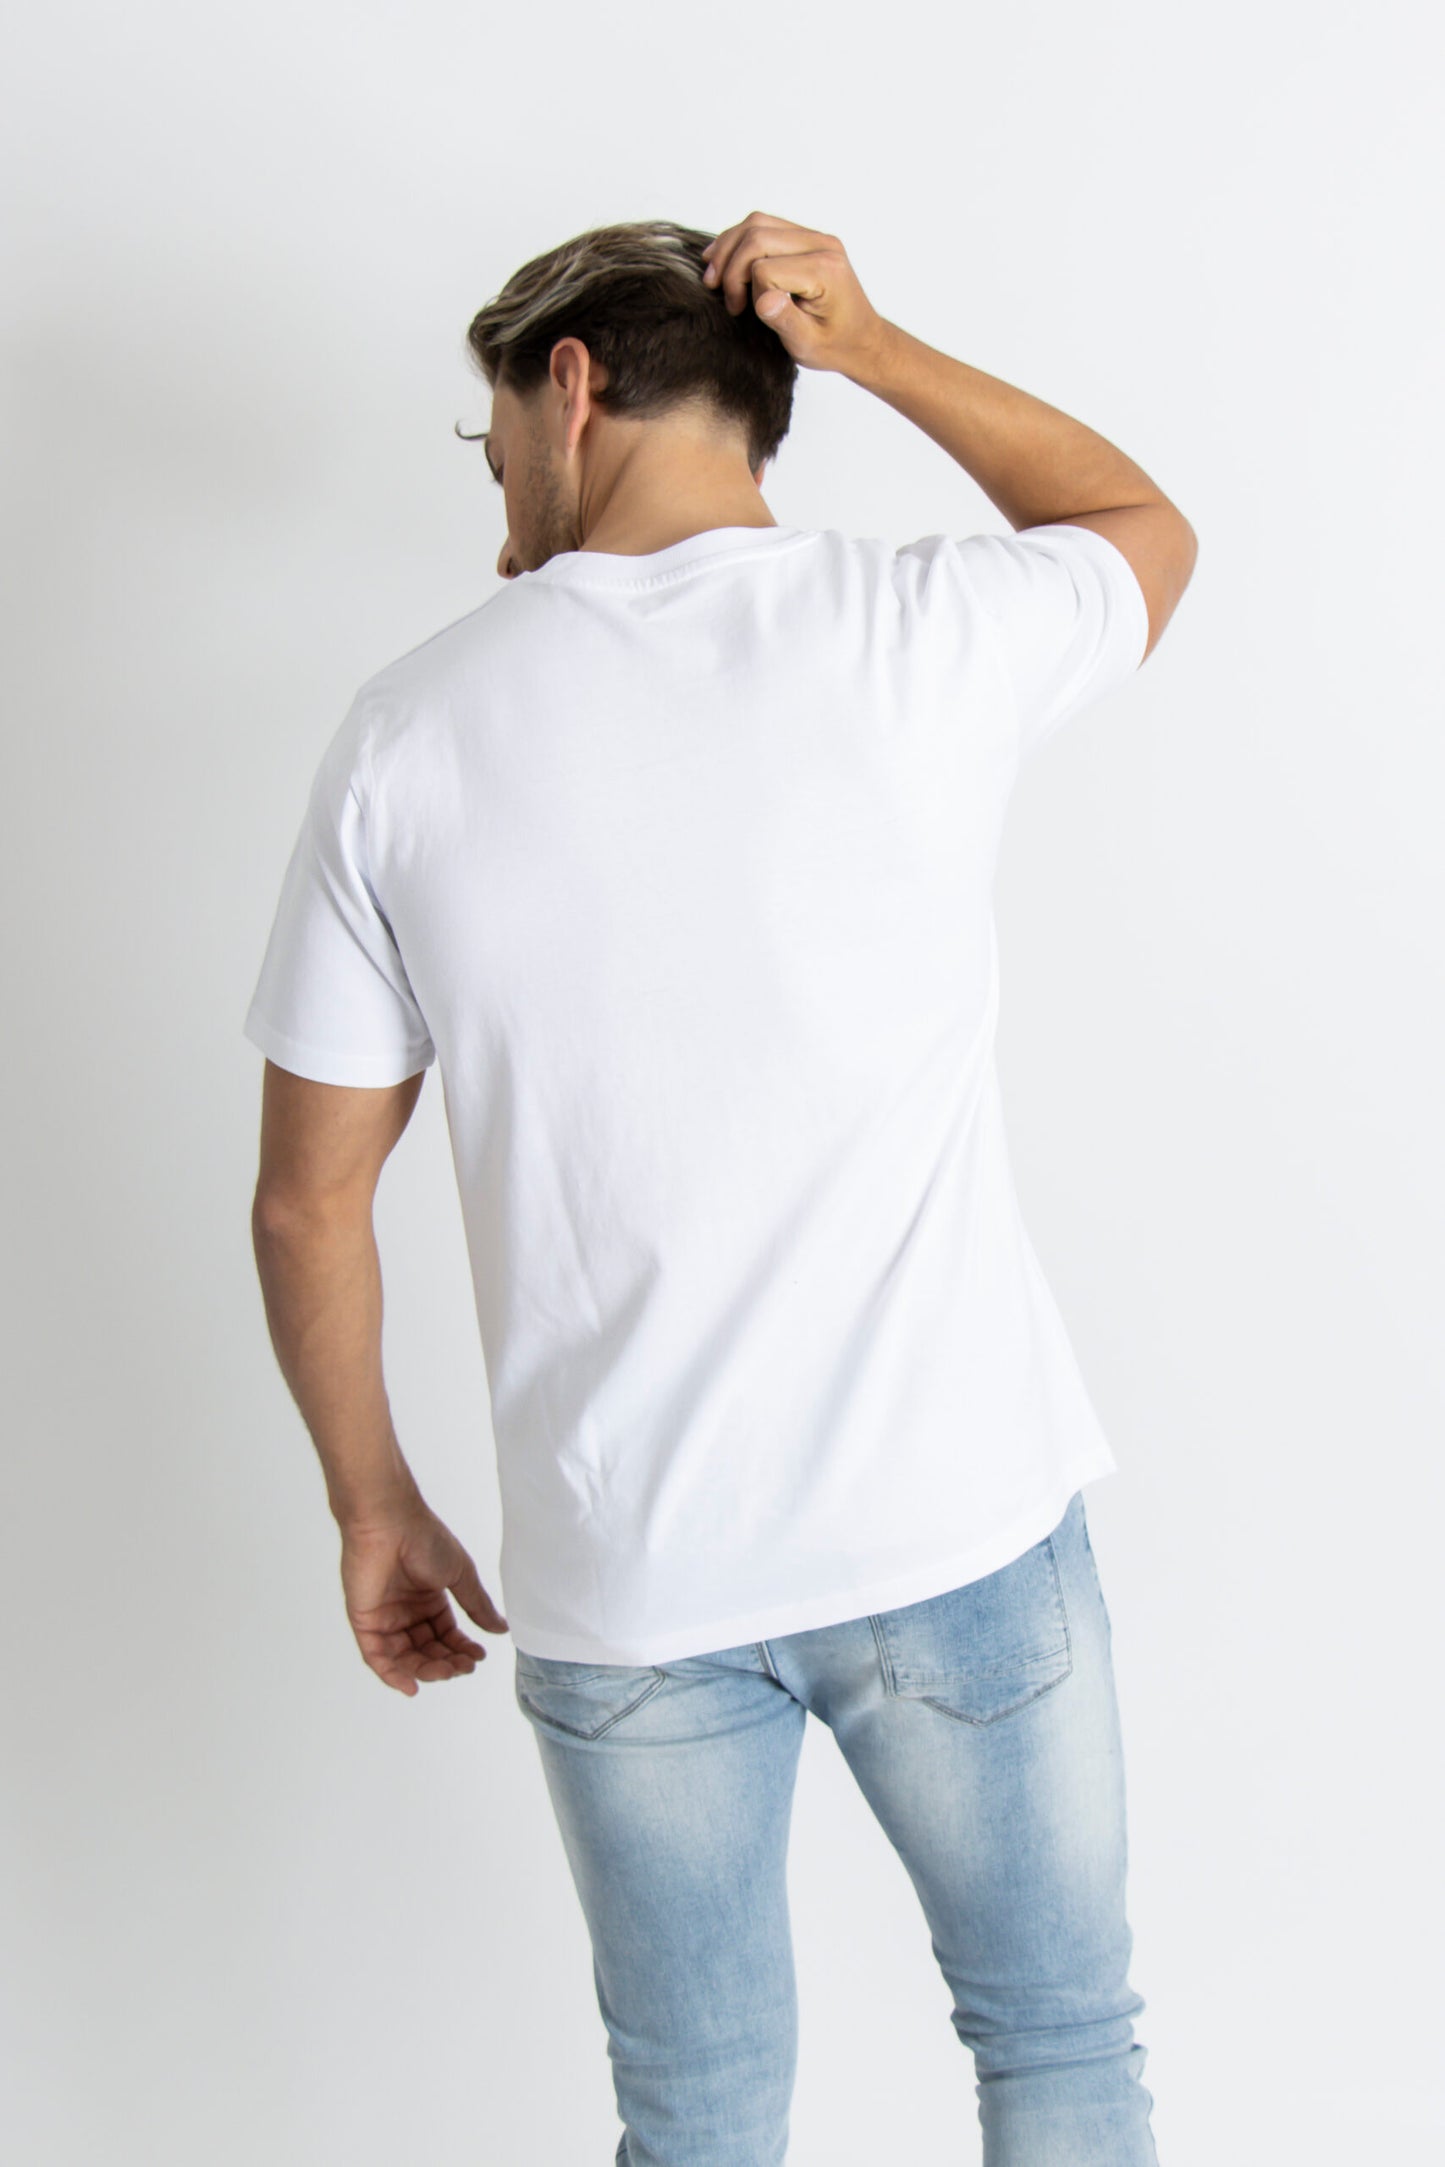 Holy cow! white t-shirt